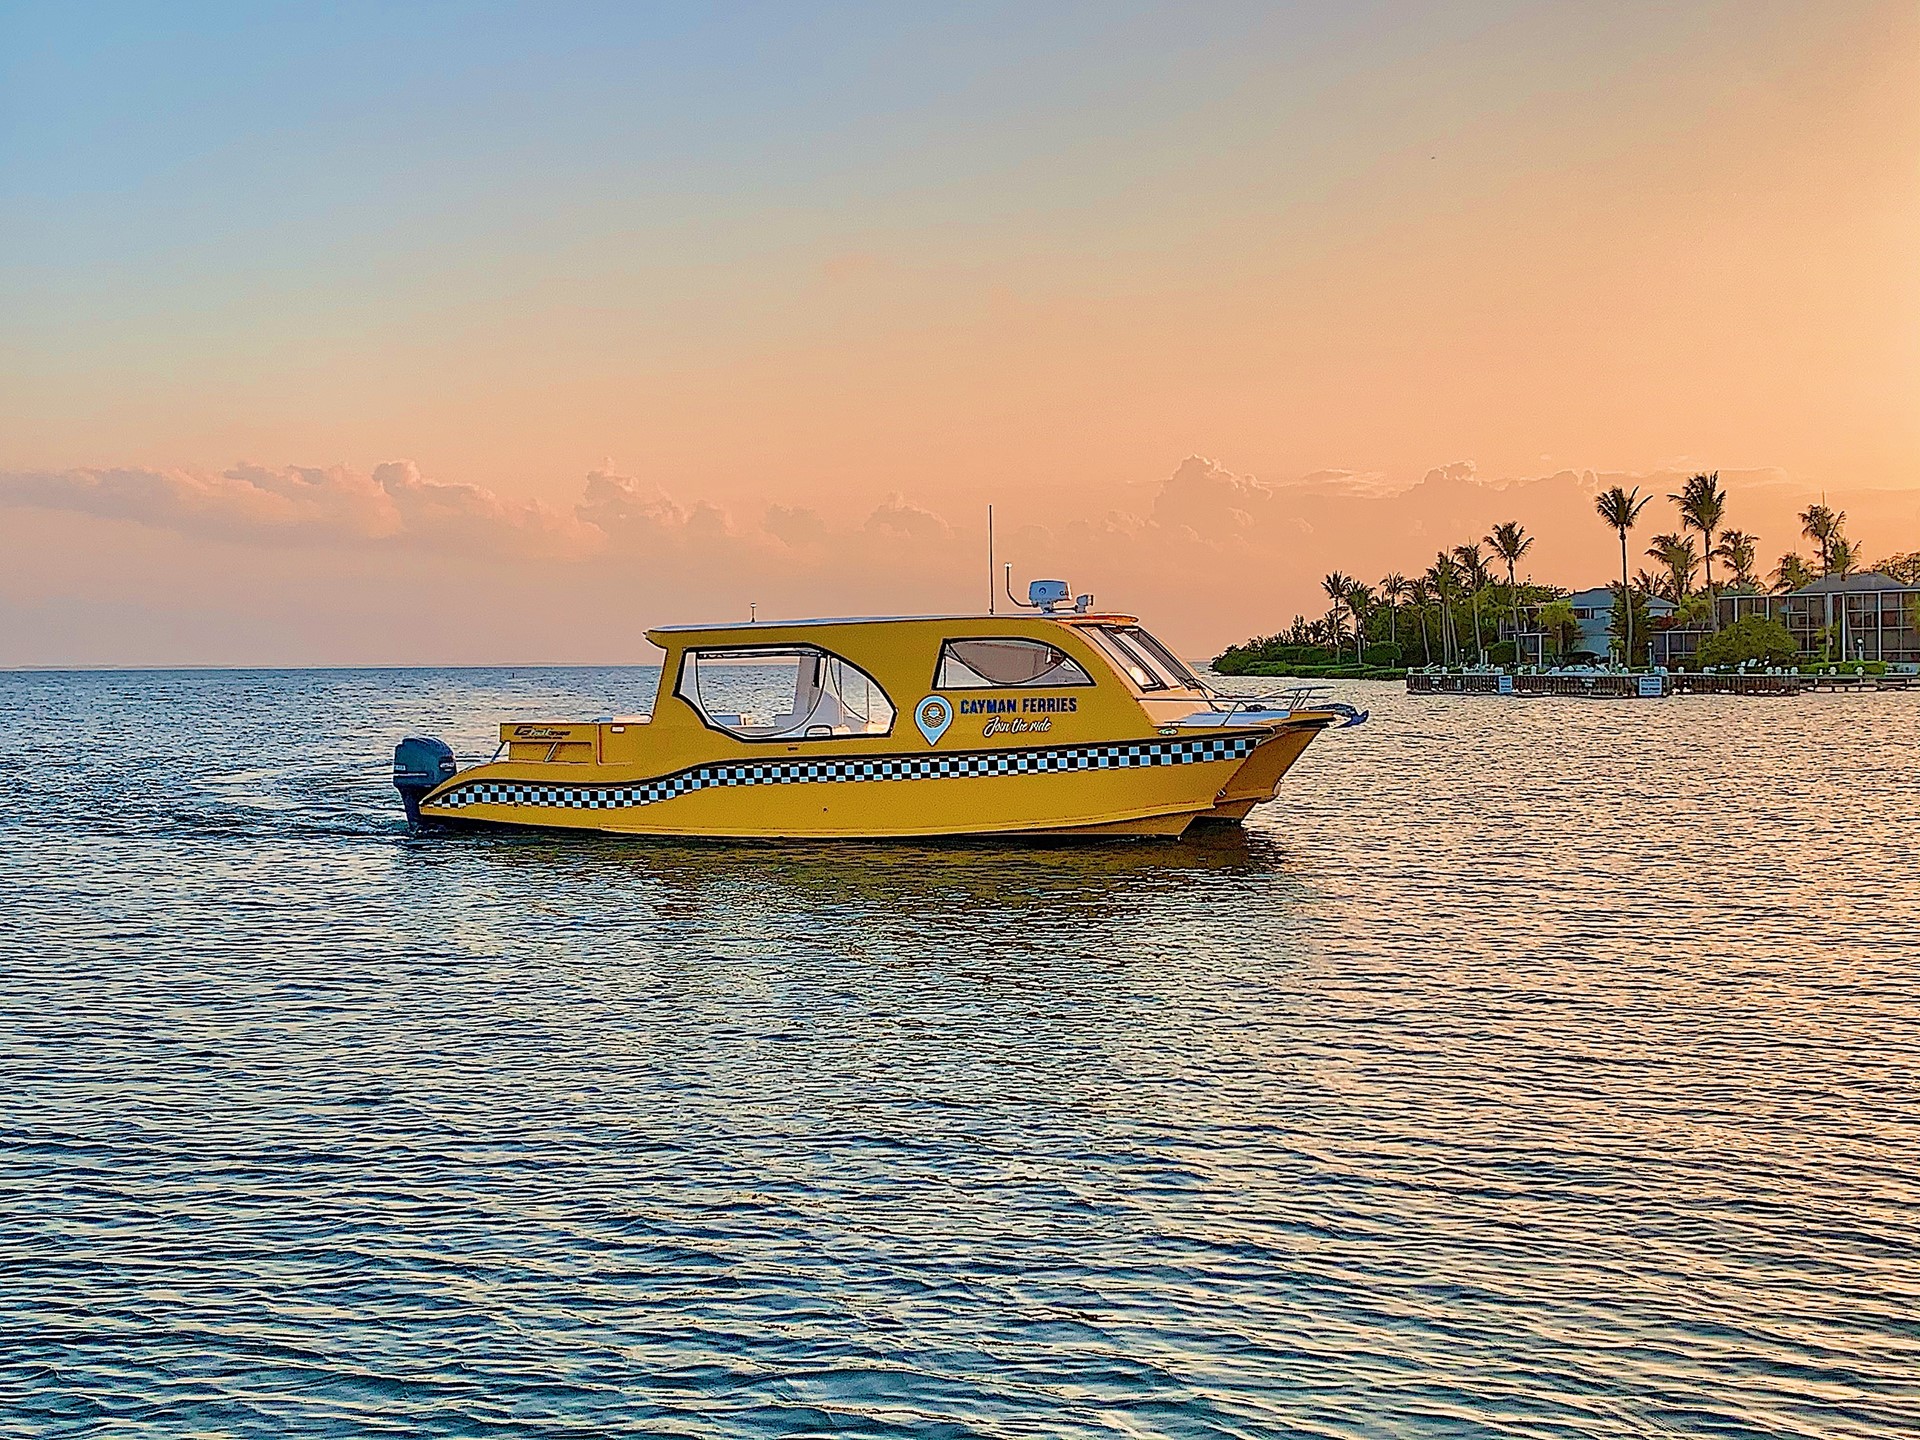 Ditching wheels for waves: Taking the commuter ferry to Camana Bay on Cayman Ferries